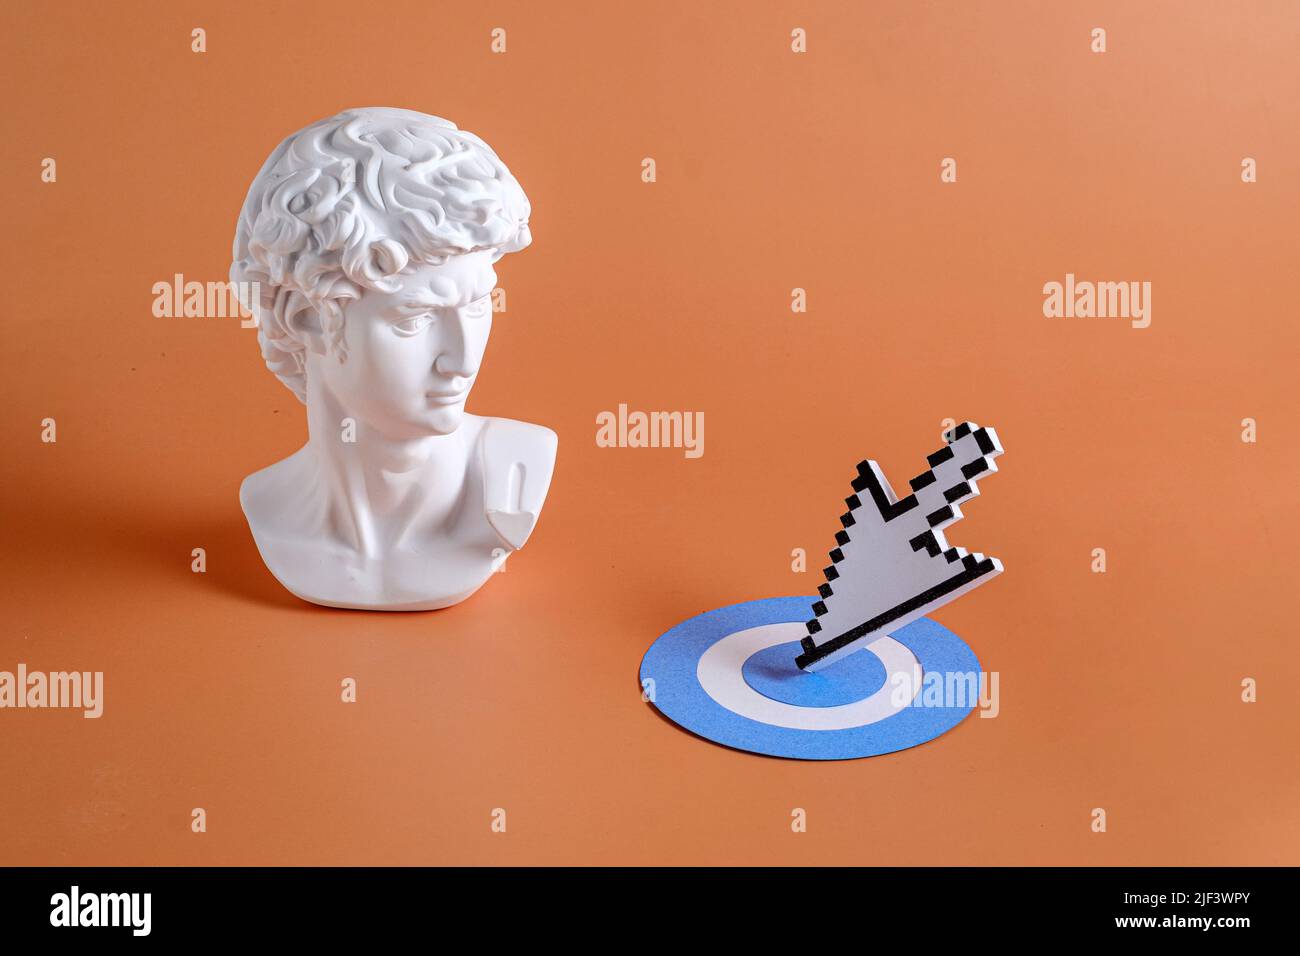 Sculpture head and bust of Michelangelo's David along with modern internet and web technologies pixel pointer cursor and target. Minimal vaporwave mar Stock Photo